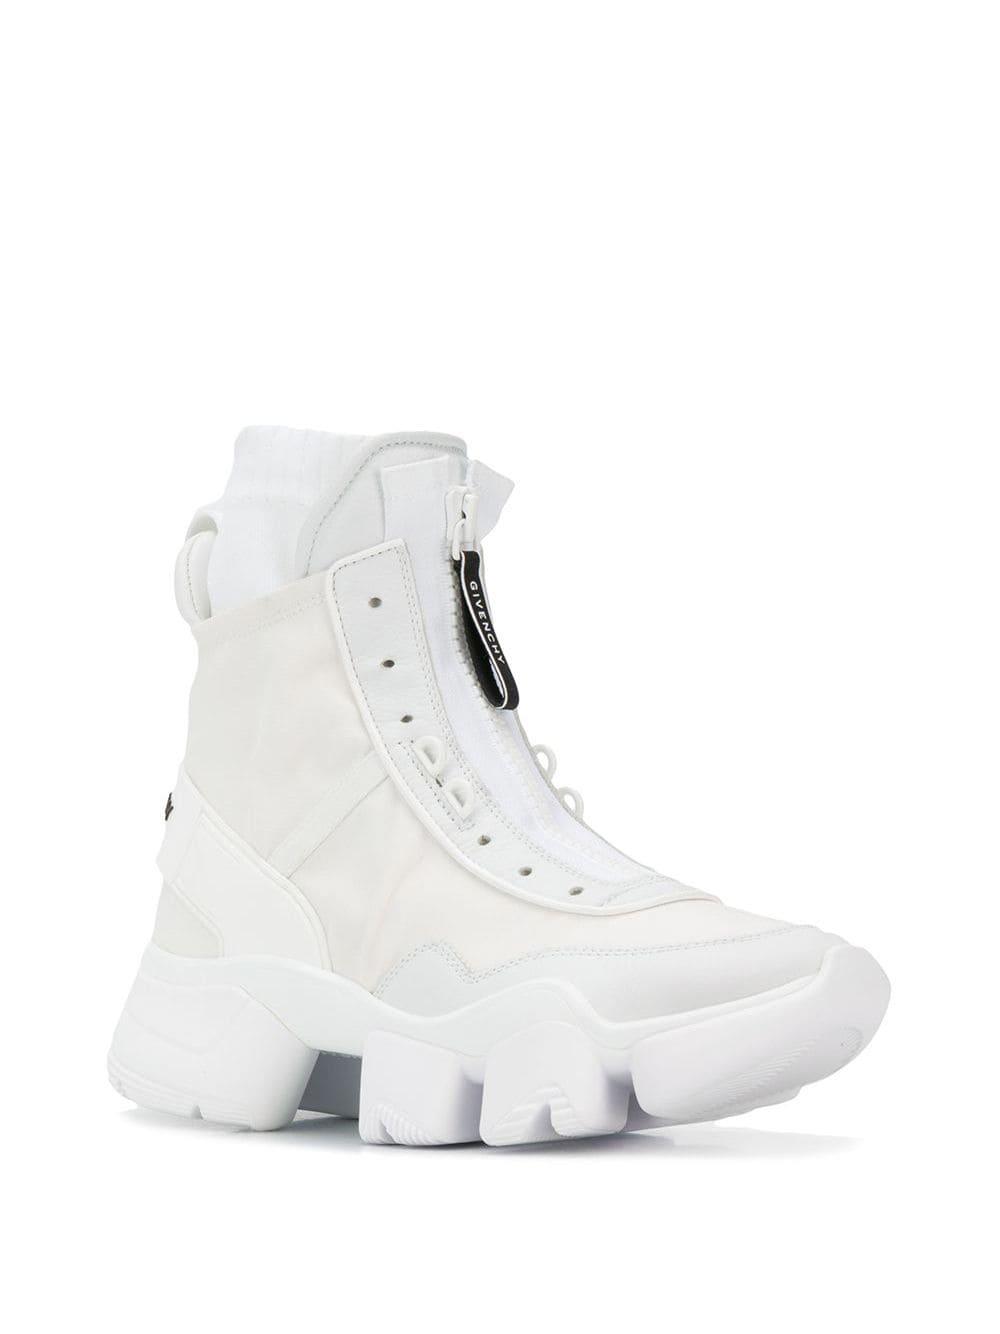 Givenchy Jaw High Sneakers in White for Men | Lyst